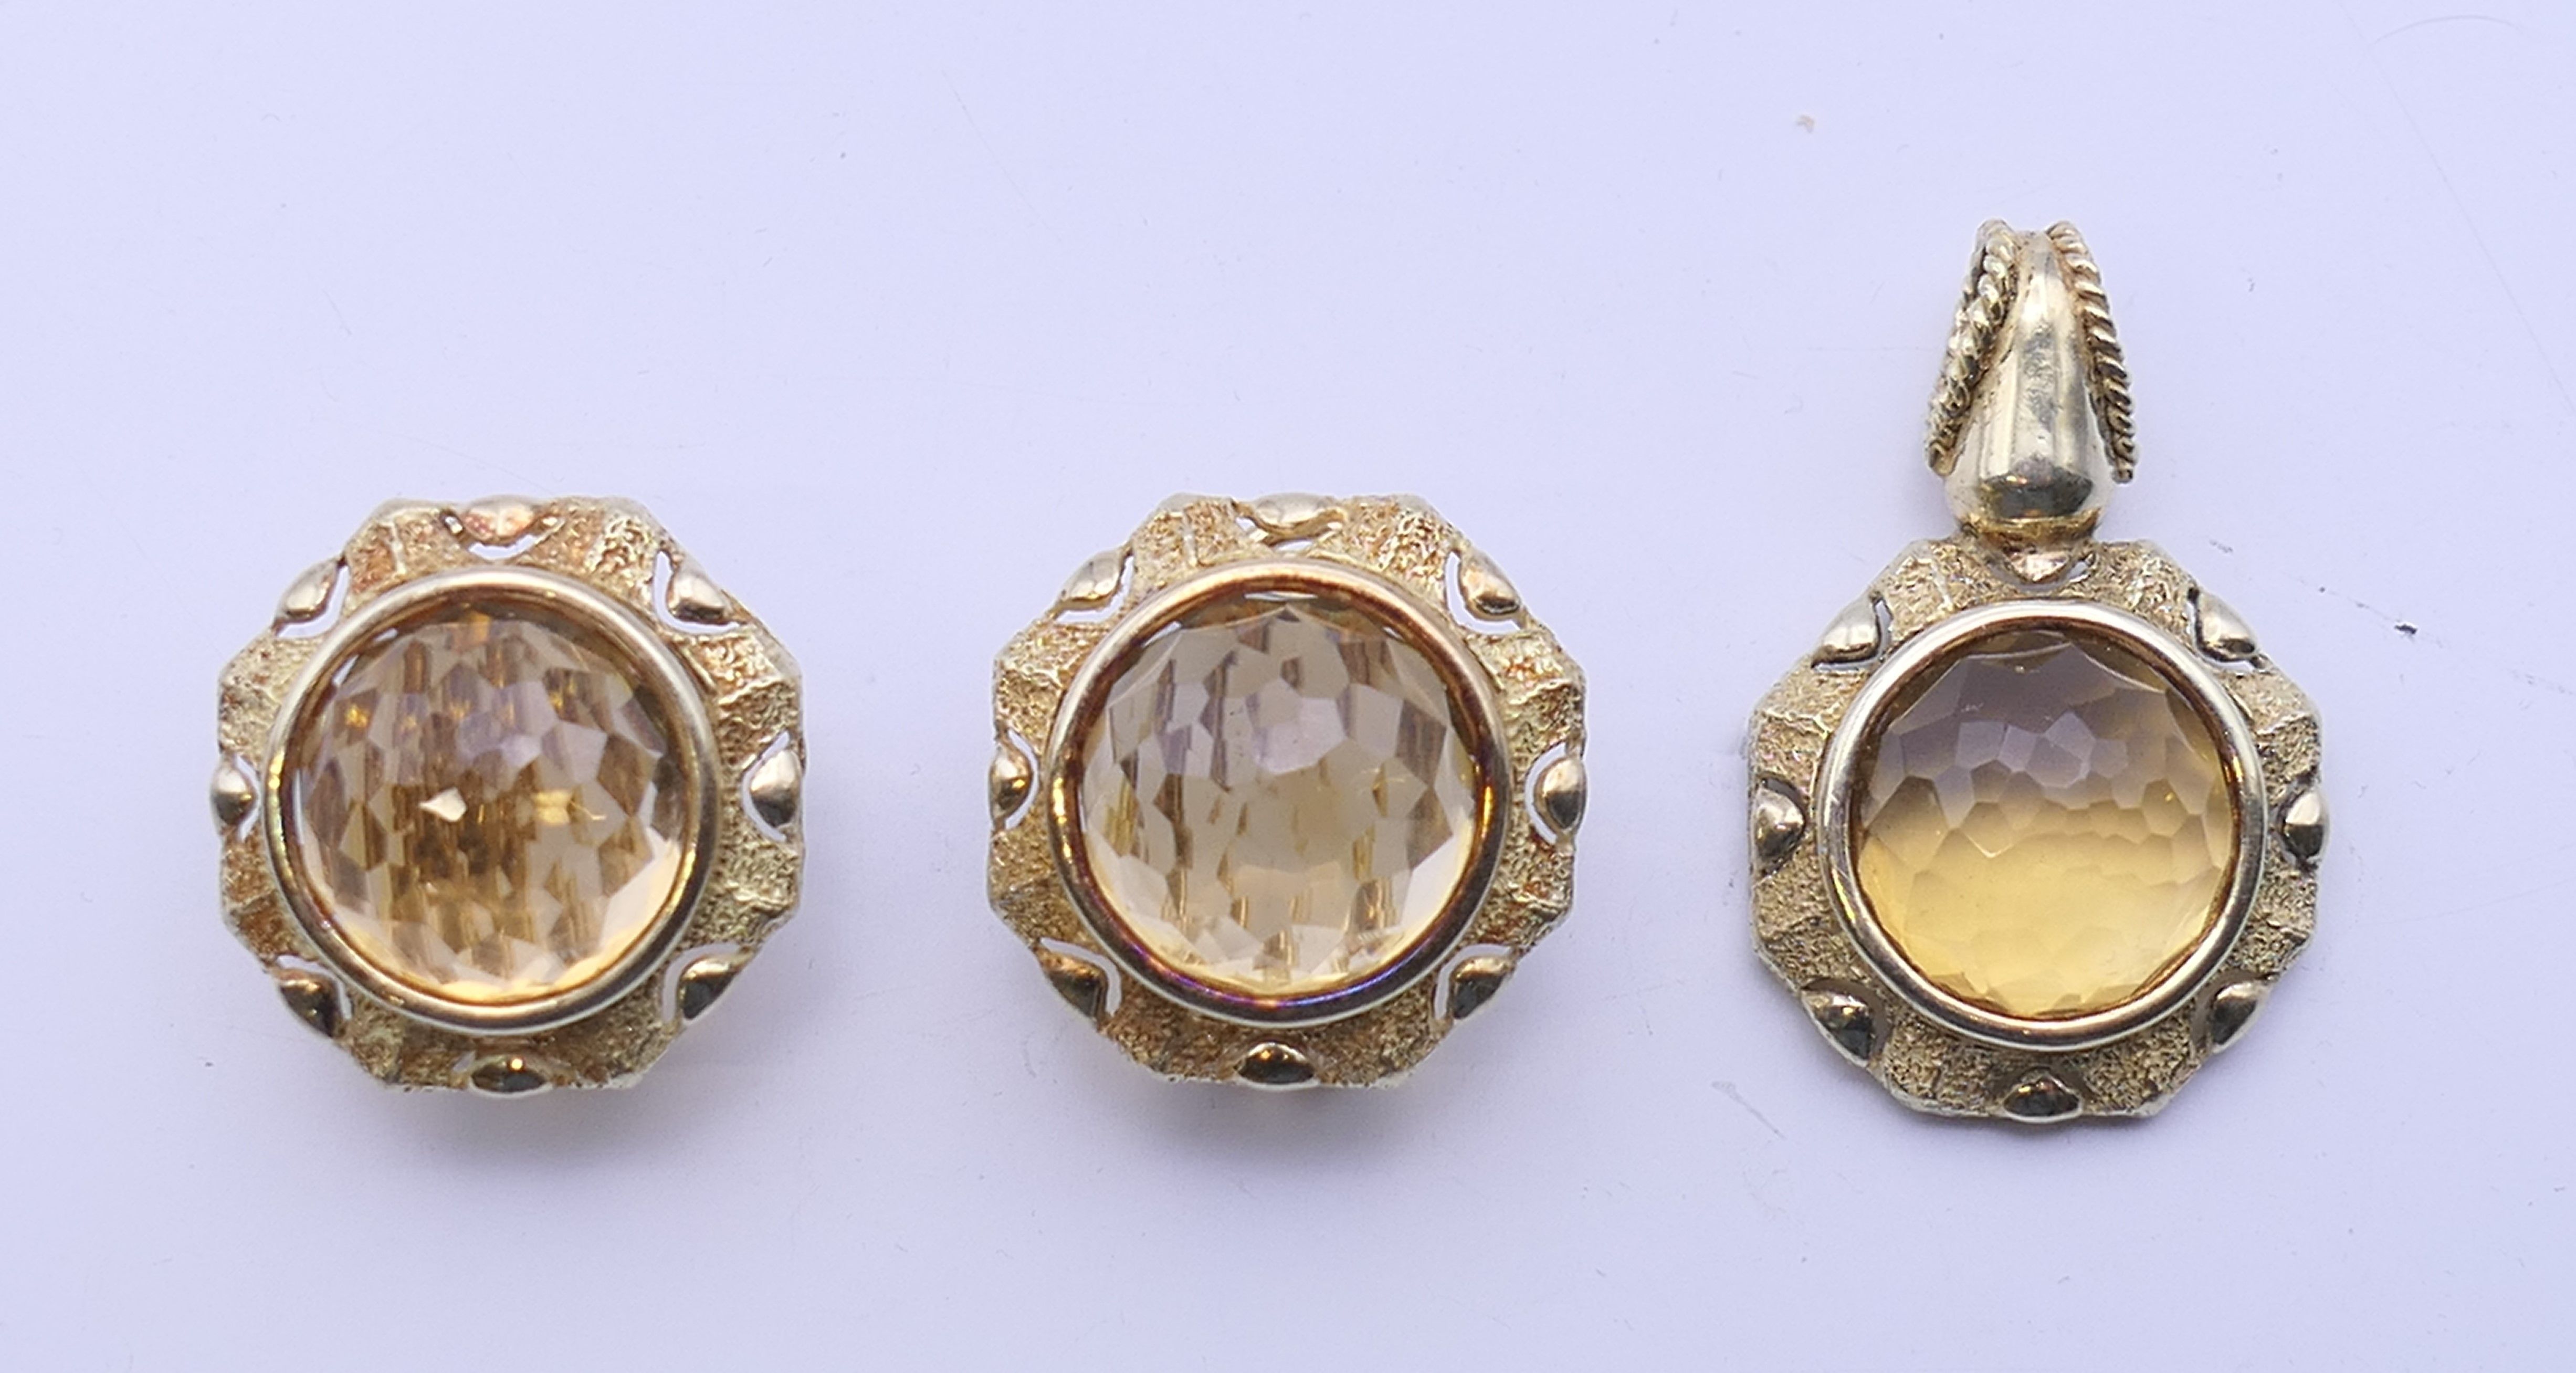 A pair of 18 ct gold citrine earrings and matching pendant. The pendant 3 cm high. 24.